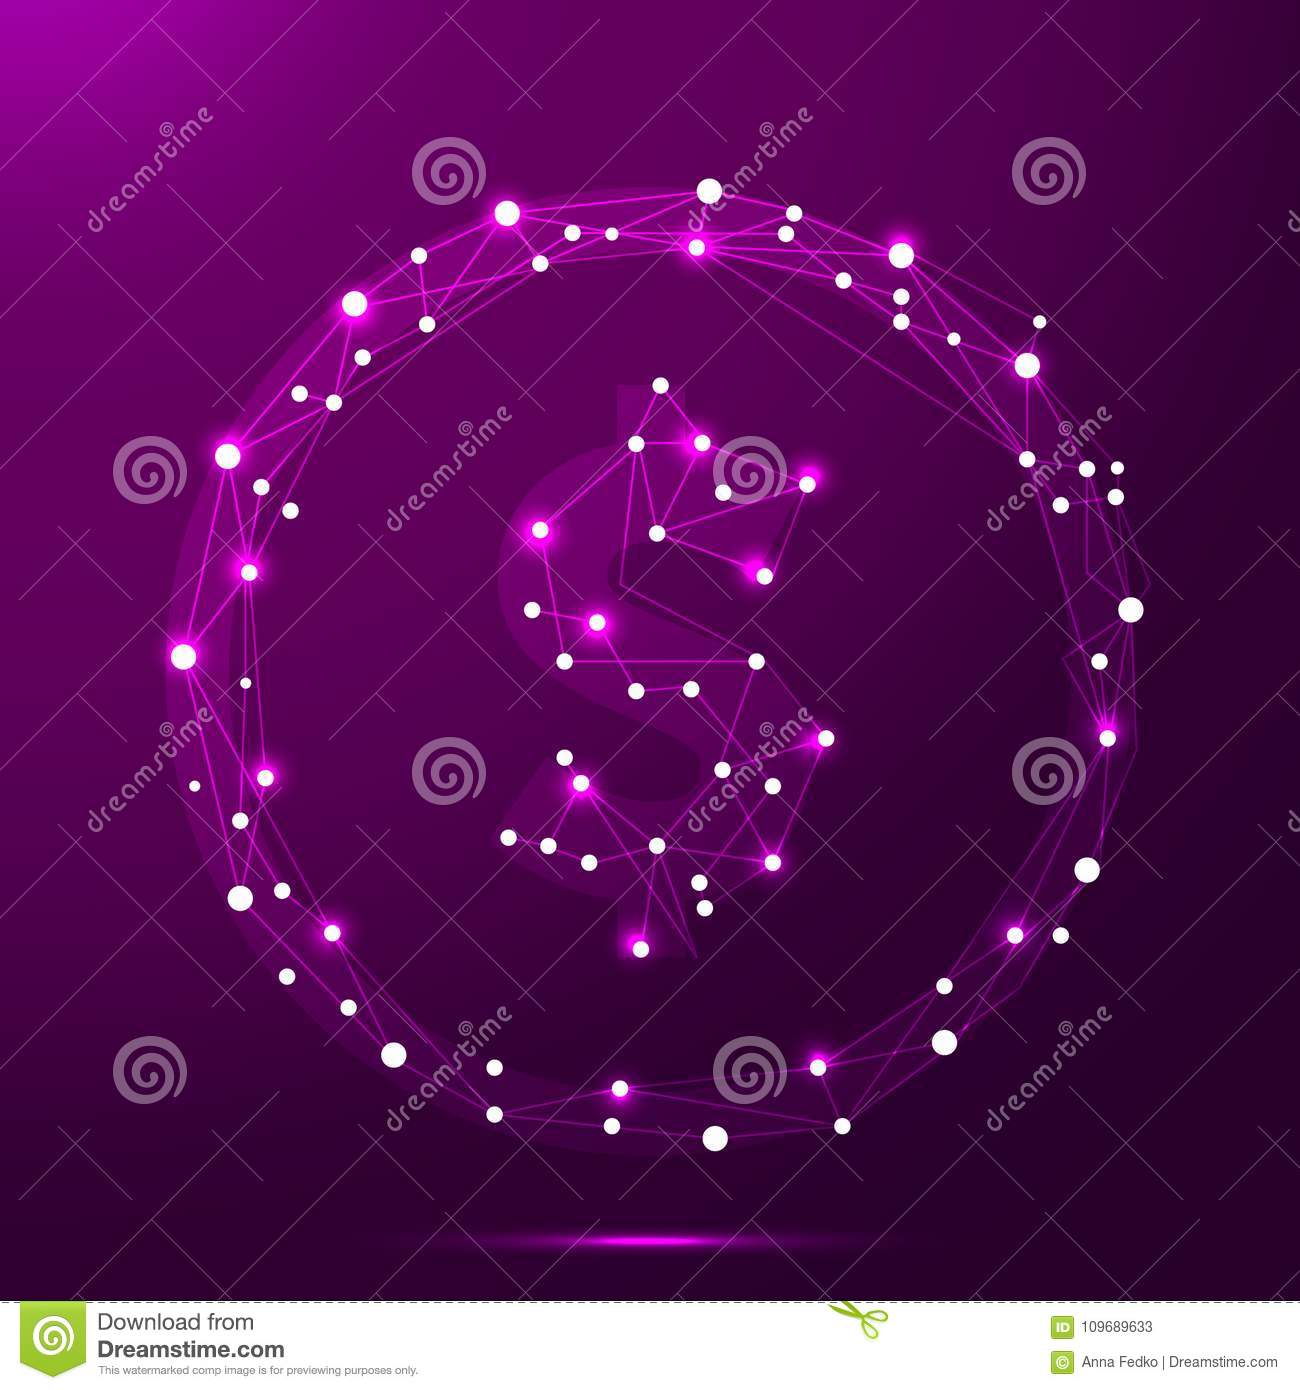 1466857409_dollar-low-poly-coin-lines-dots-connected-to-form-vector-illustration-dollar-low-poly-coin-lines-dots-connected-to-form-109689633.jpg